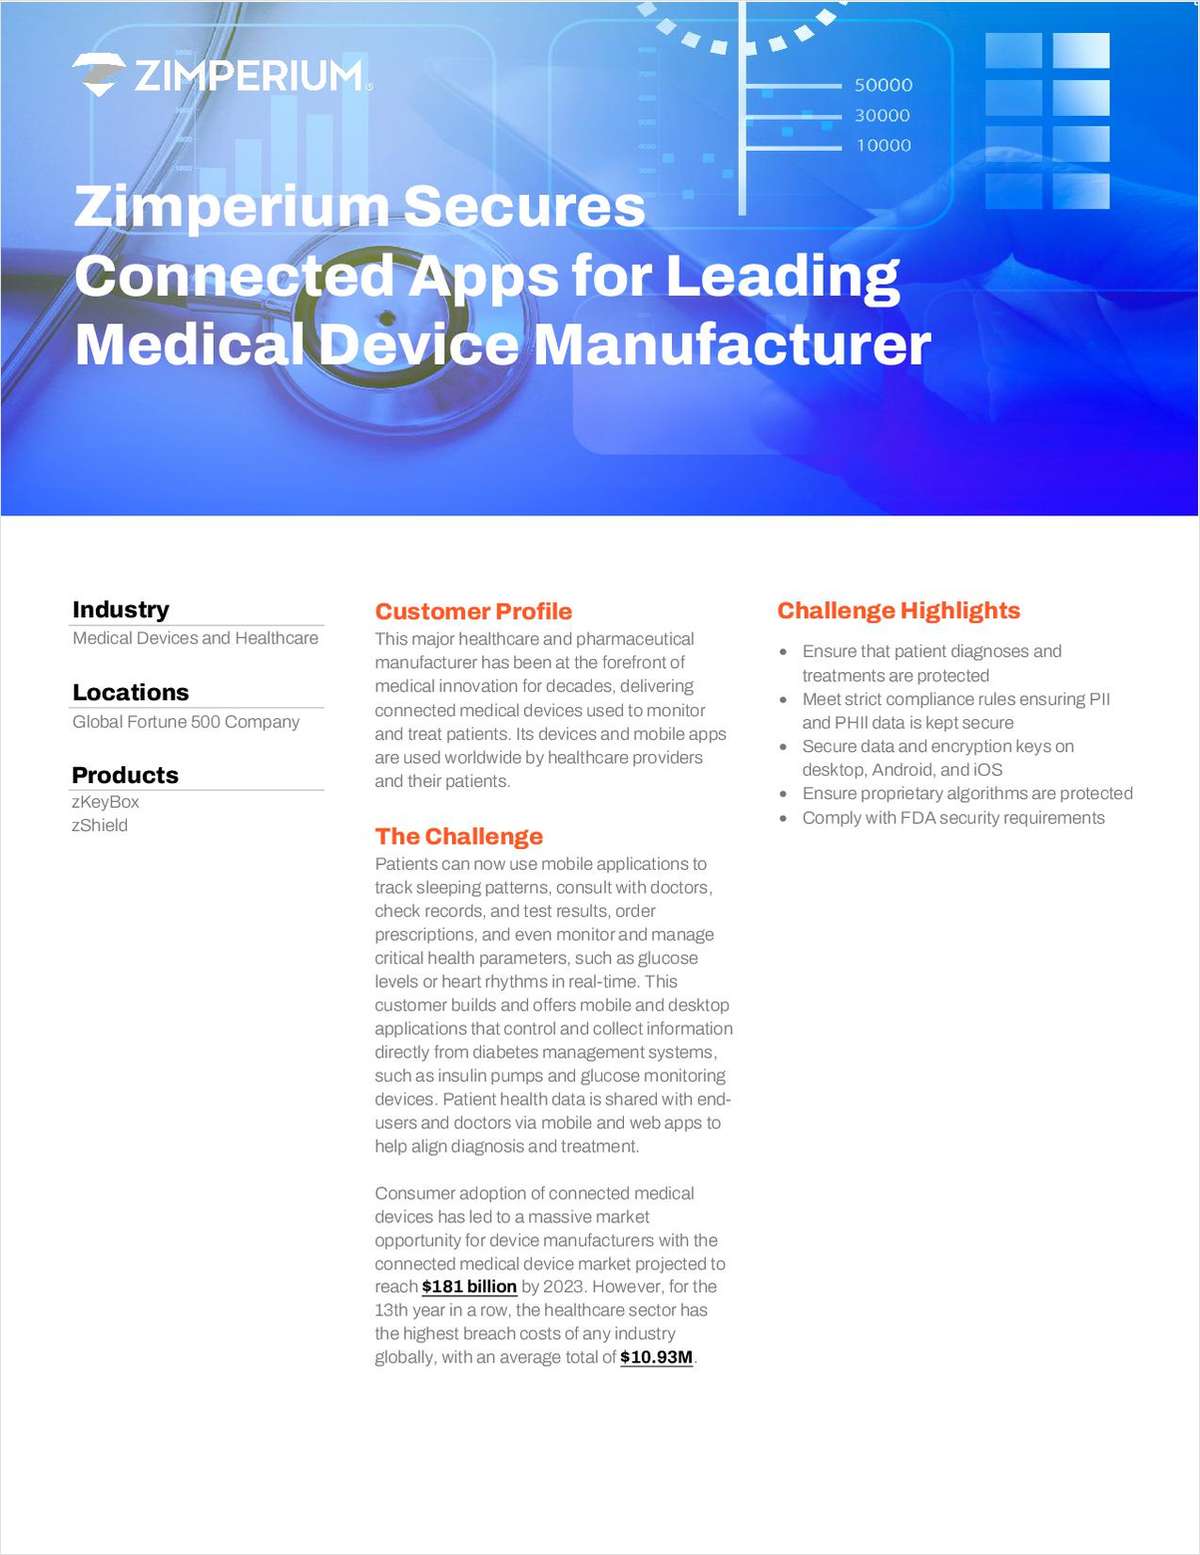 Zimperium Secures Connected Apps for Leading Medical Device Manufacturer